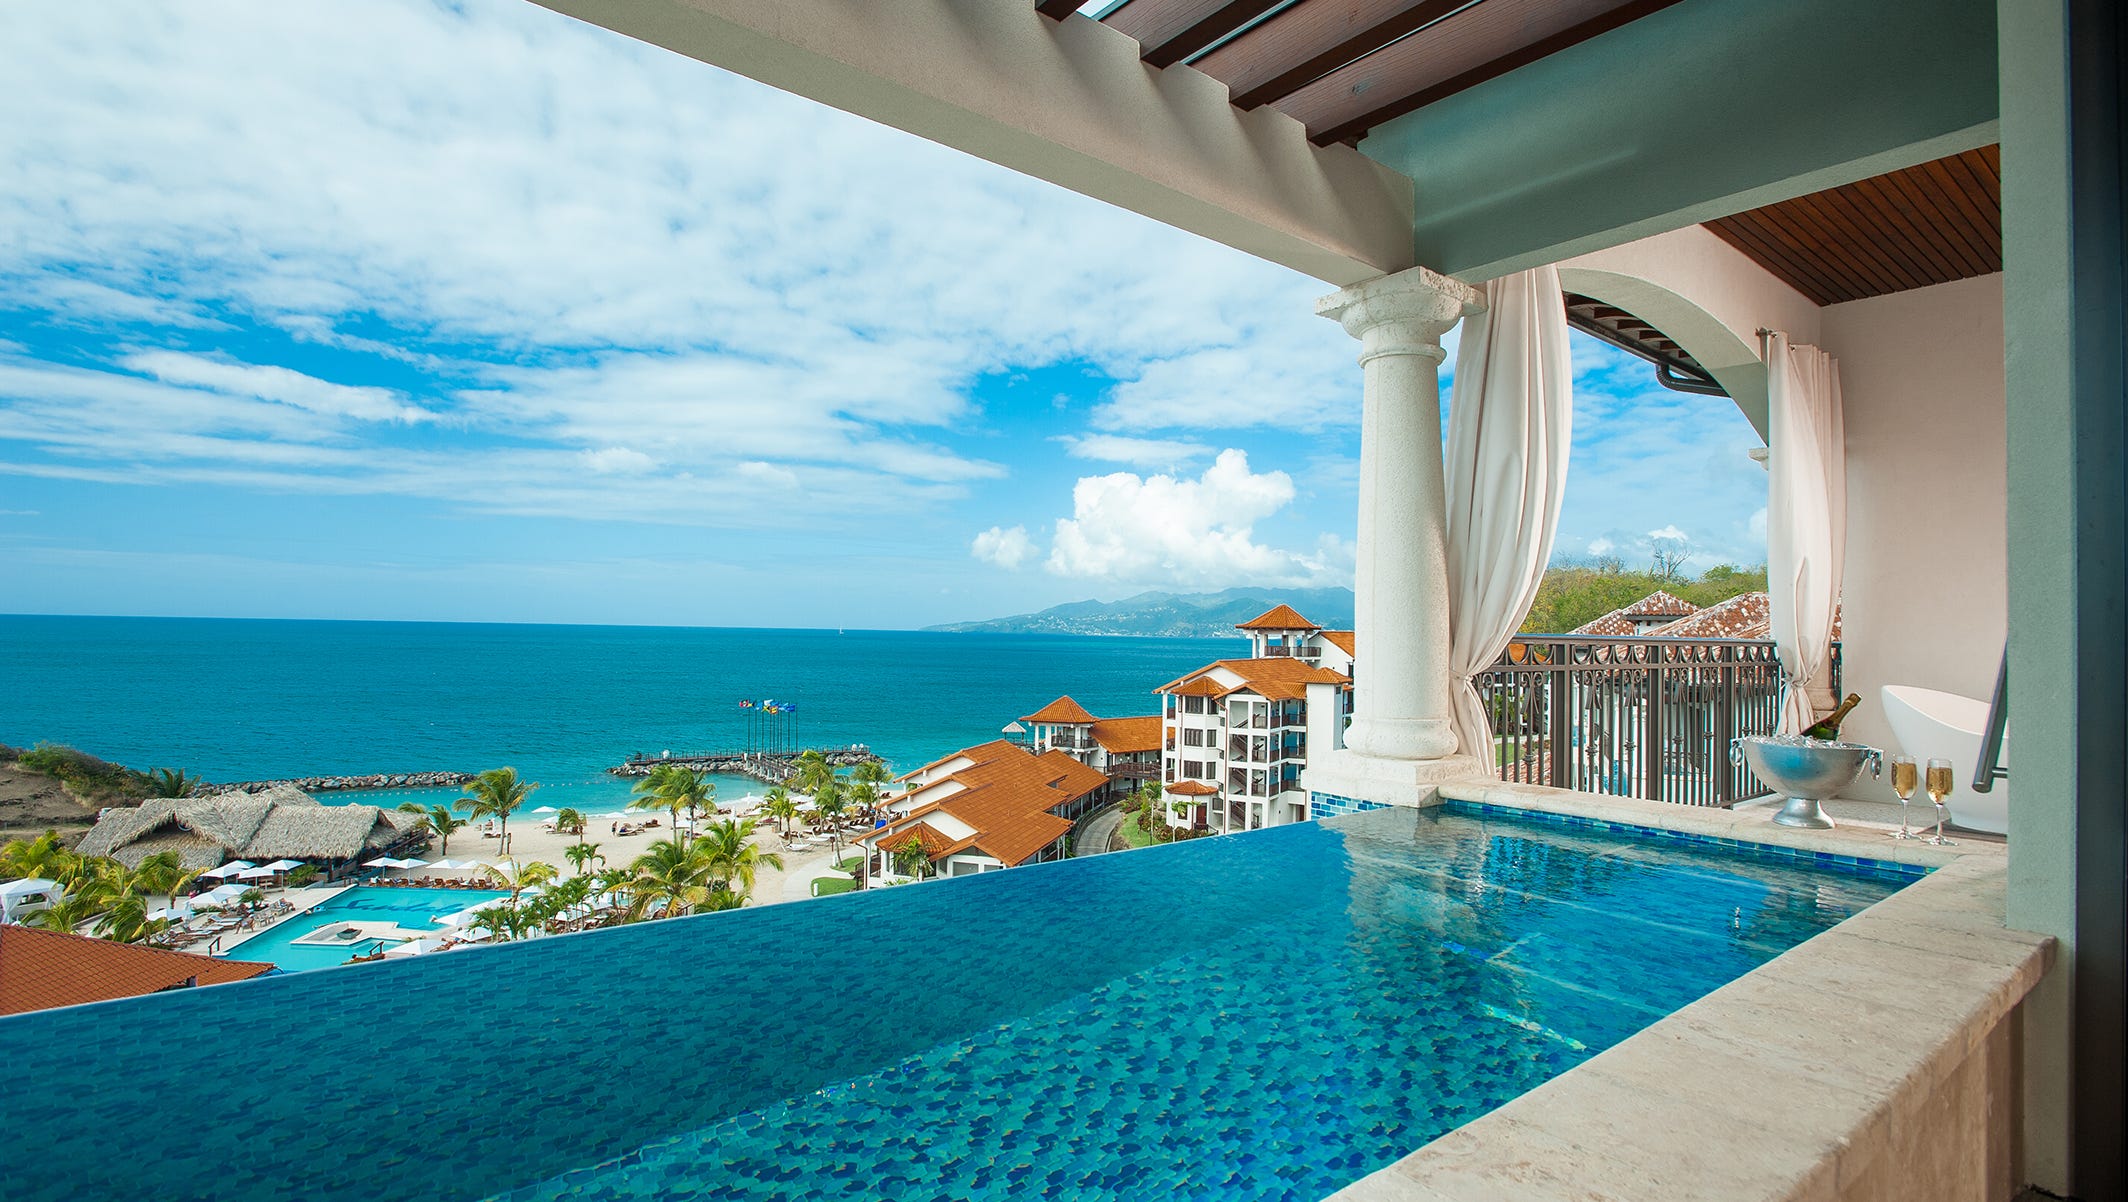 In your dreams: Ultra-luxurious Caribbean honeymoons